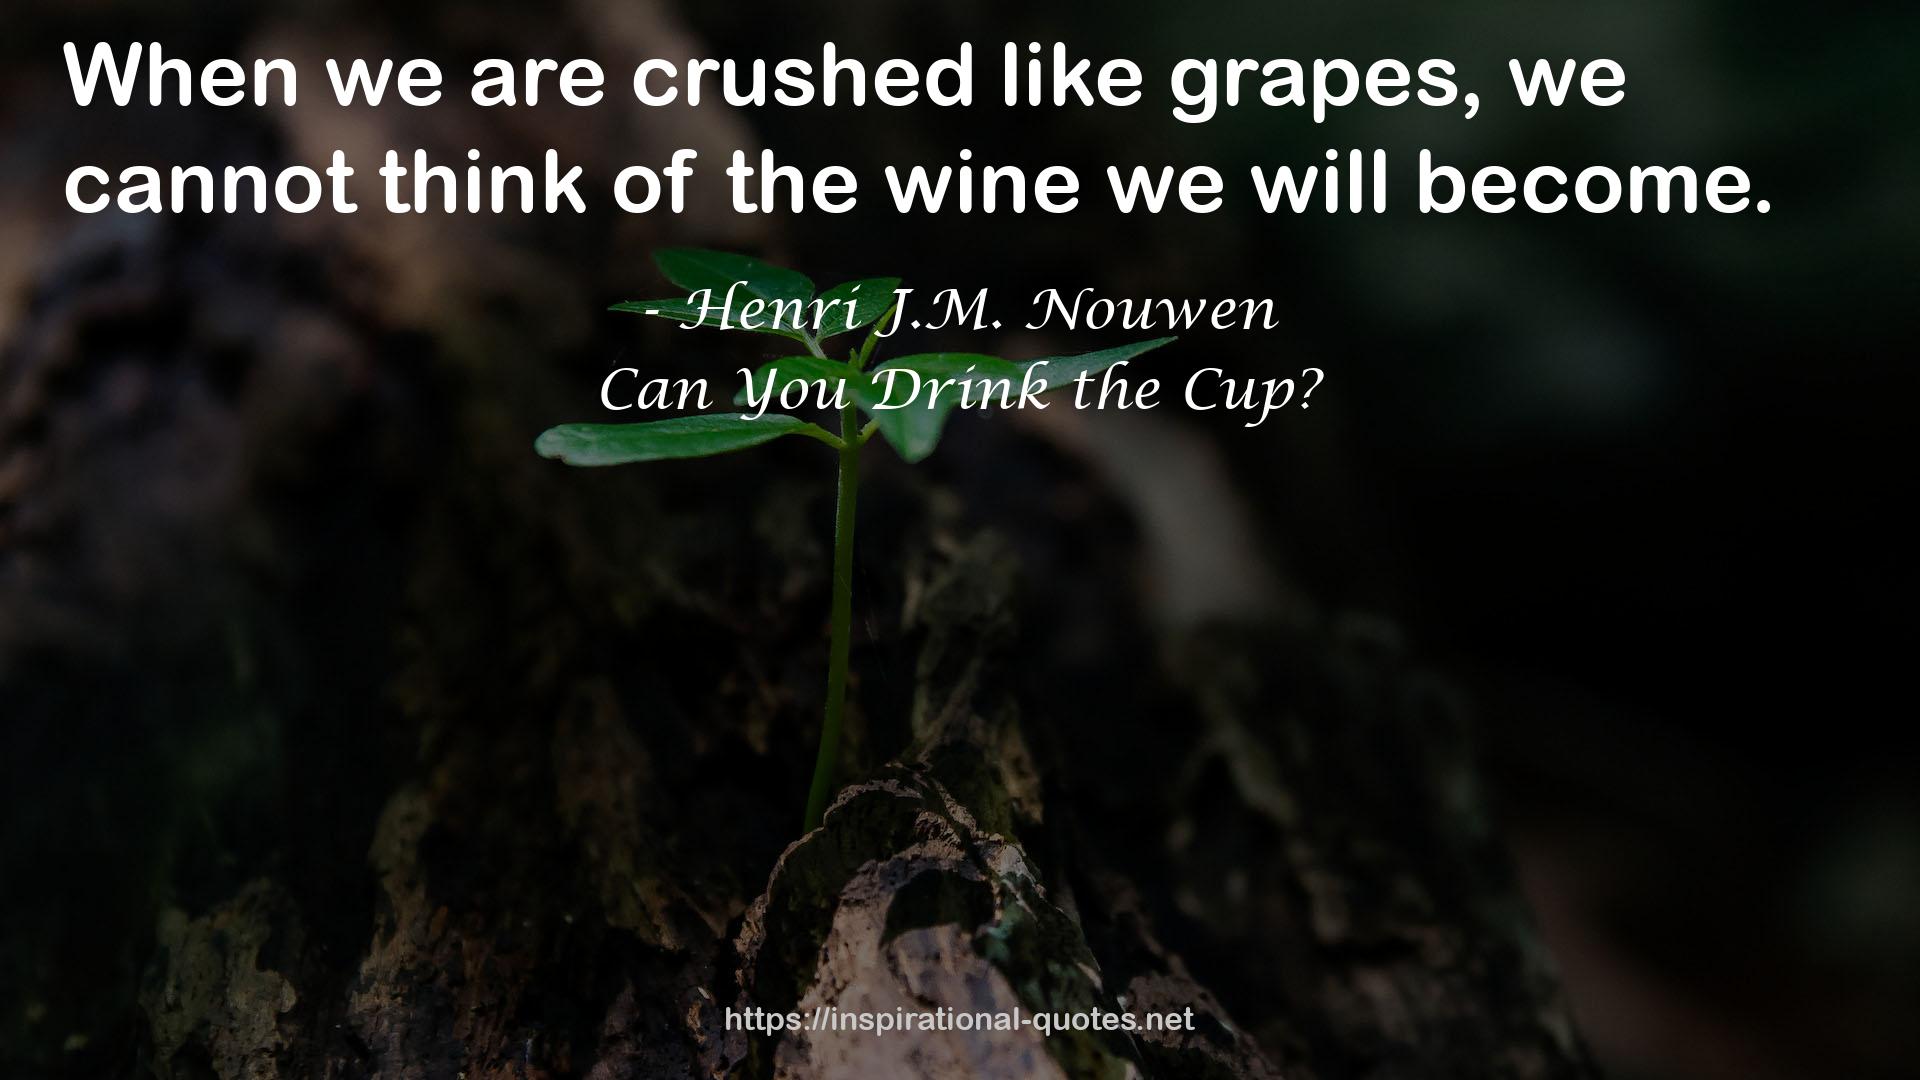 Can You Drink the Cup? QUOTES